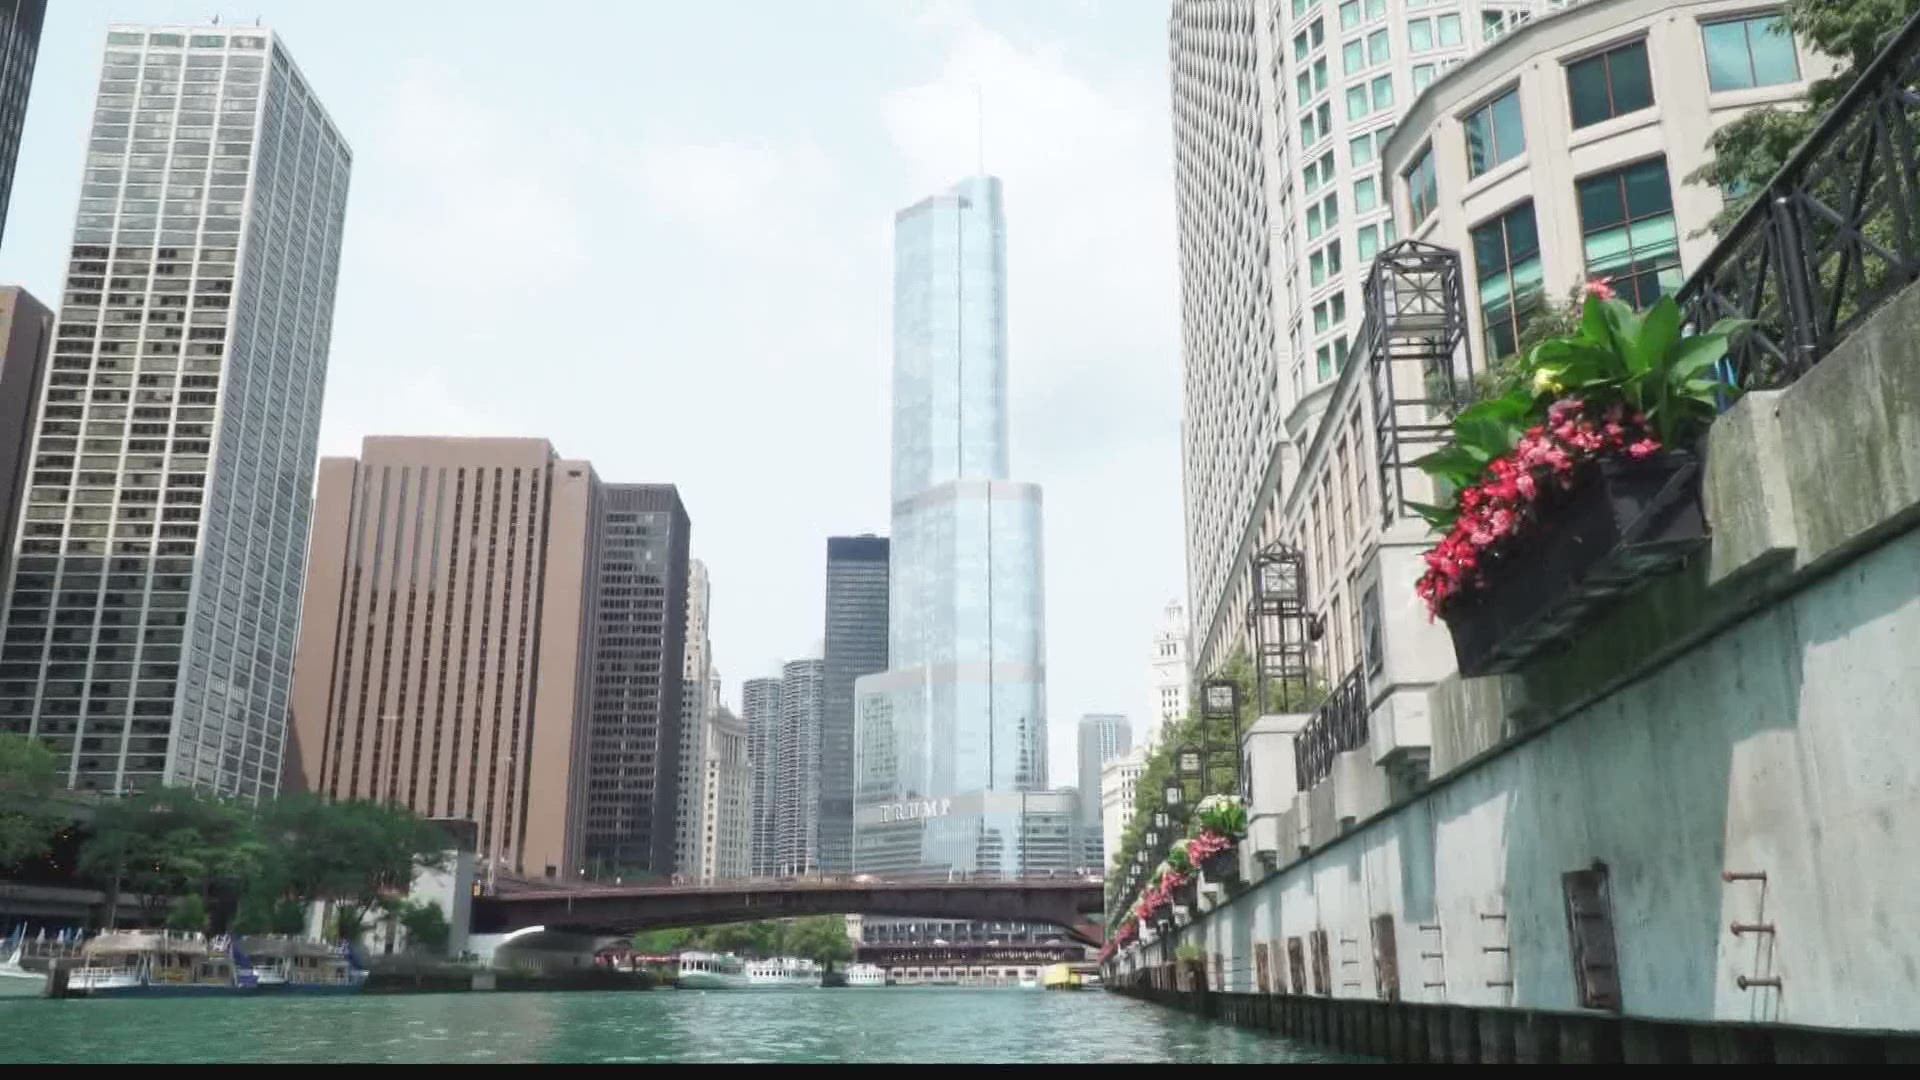 Chuck Lofton's latest "Big Adventure" took him to the Windy City and he's got another sneak peek of the history, adventure and the food scene in Chicago!